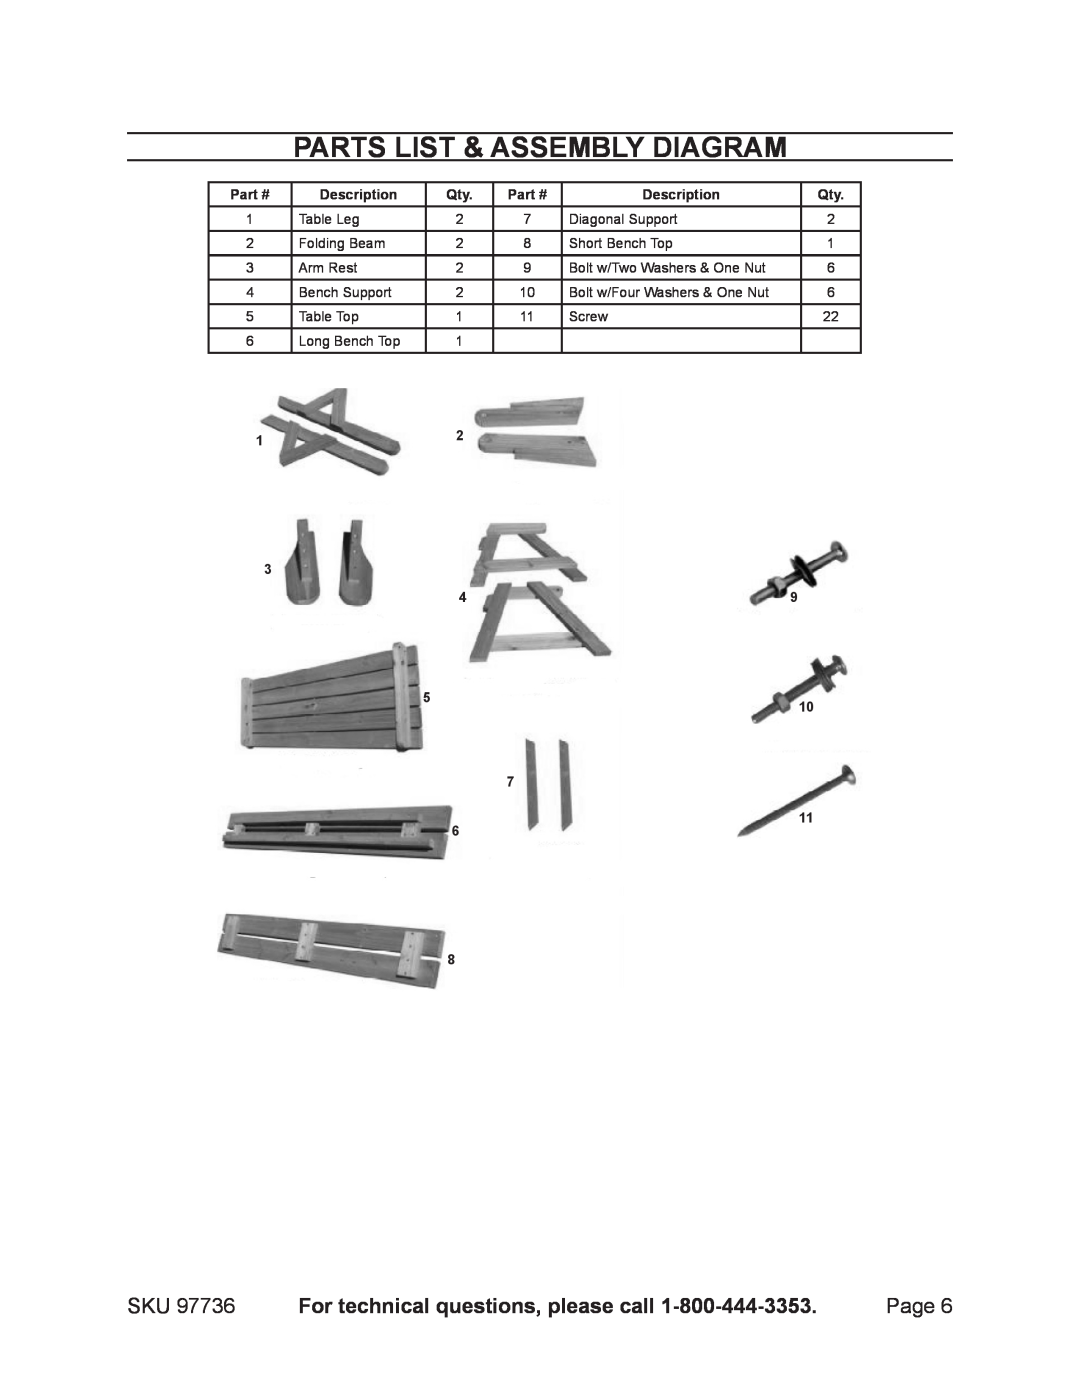 Harbor Freight Tools 97736 manual Parts List & Assembly Diagram, For technical questions, please call, Description 